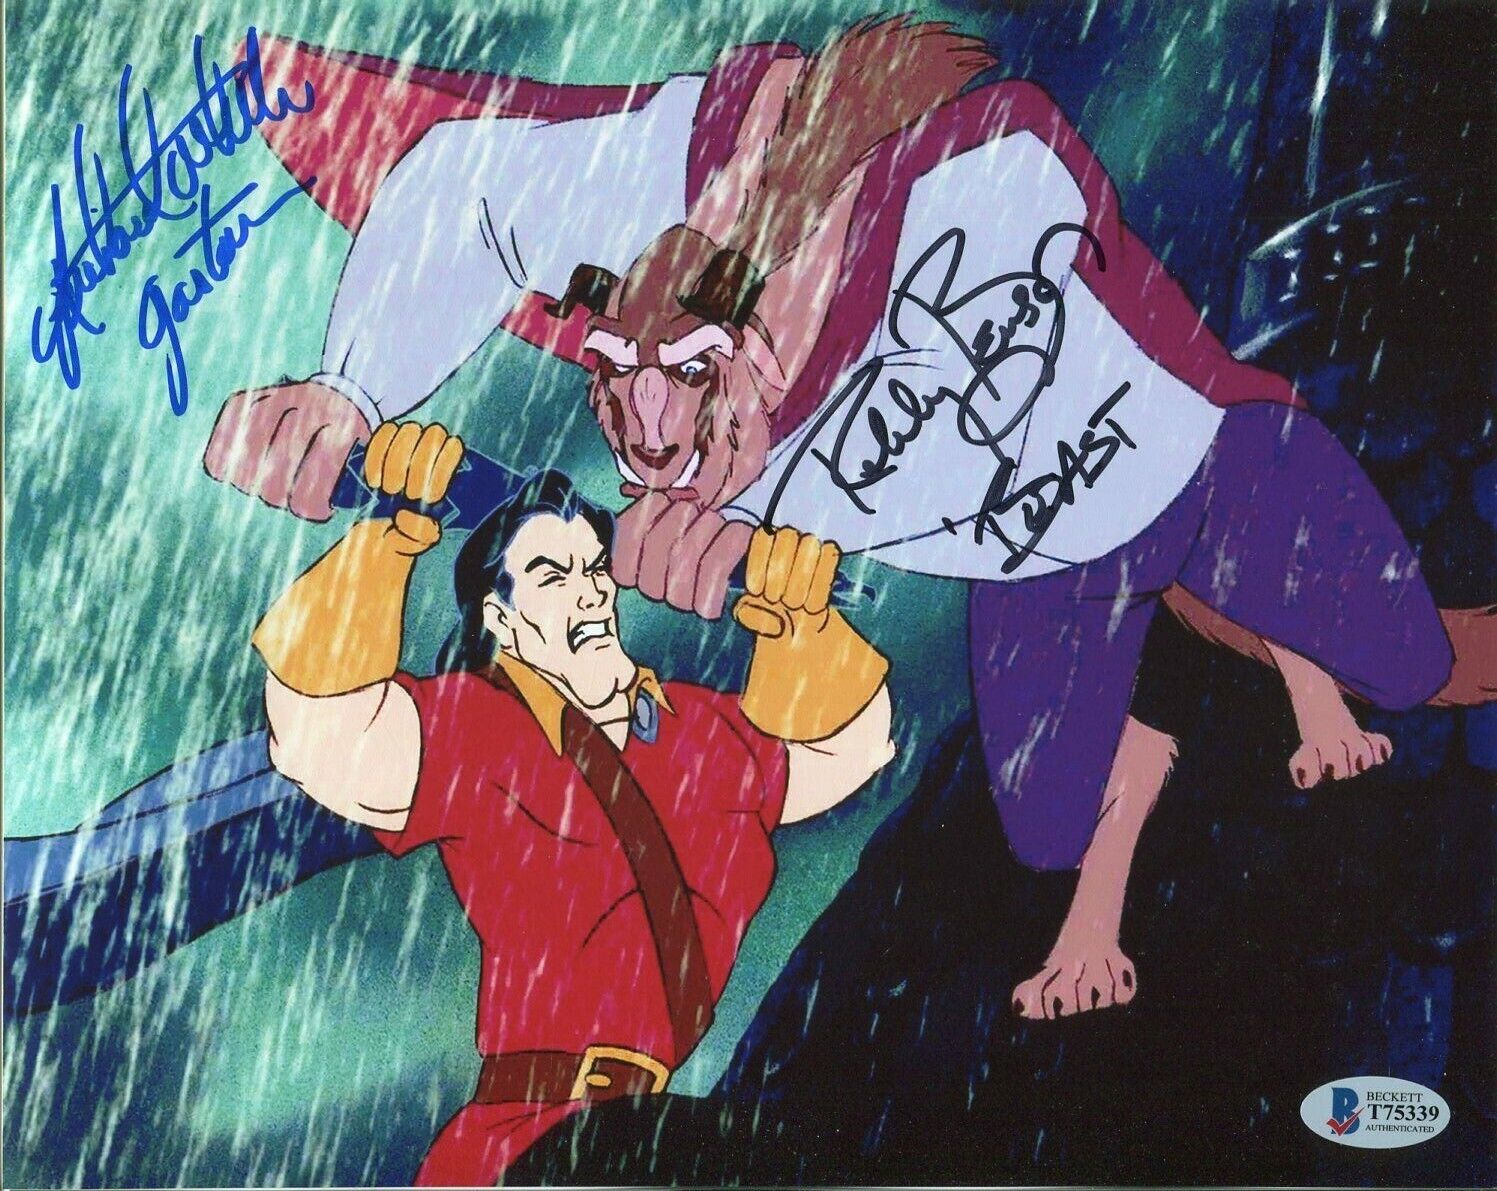 Richard White & Robby Benson Beauty And The Beast Signed Autograph Photo BAS